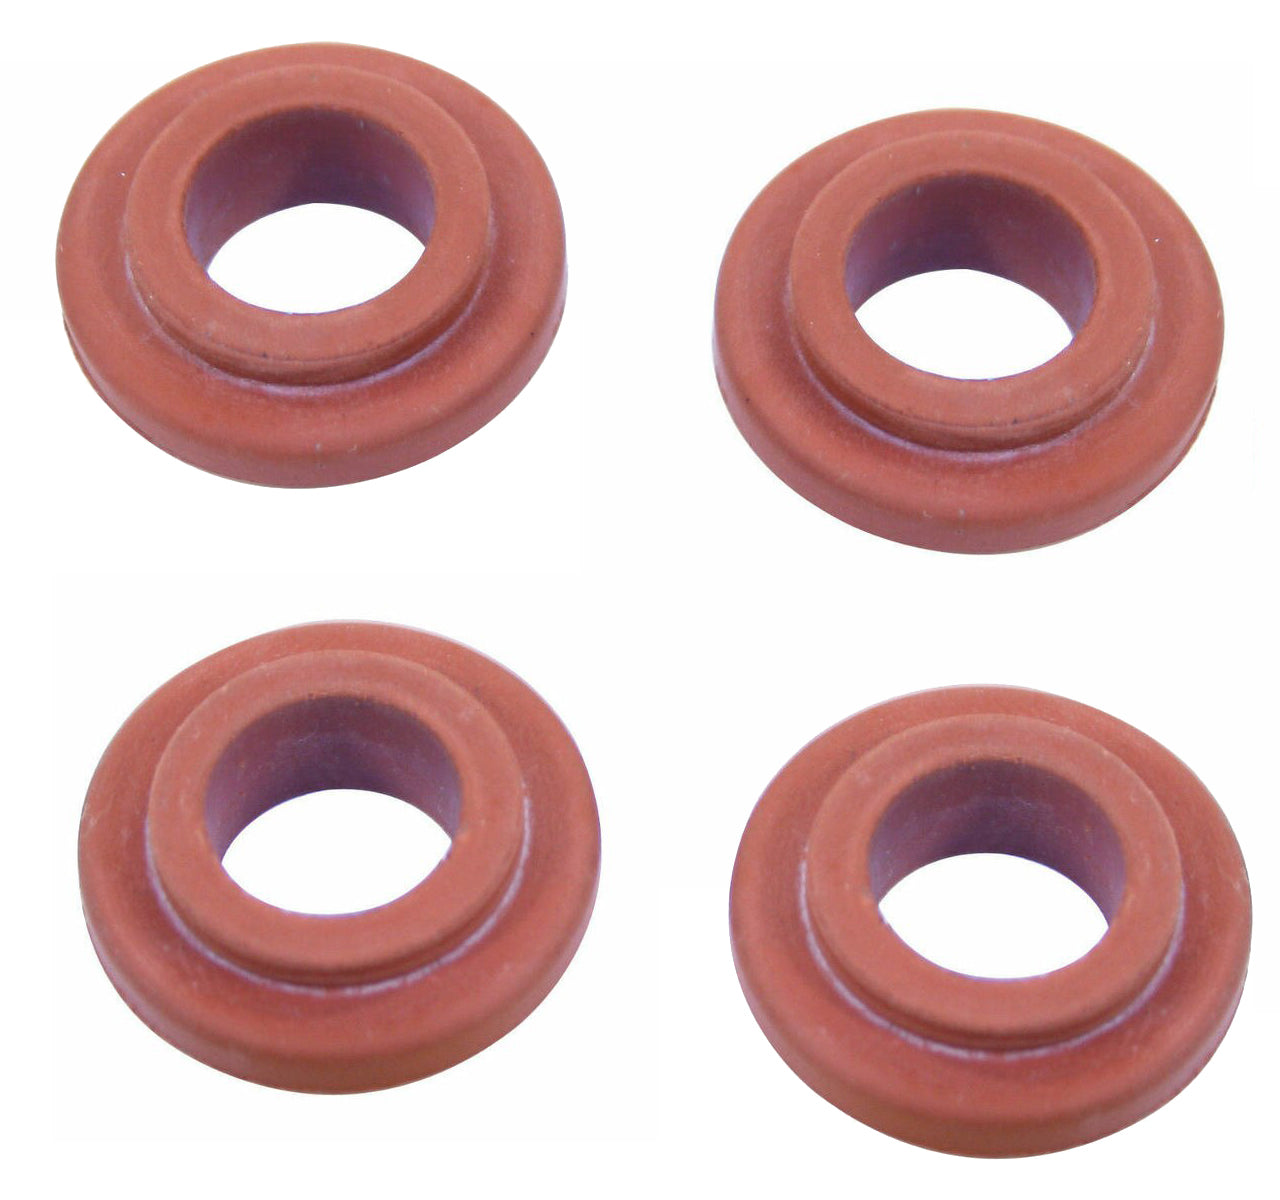 Dog House Style Oil Cooler Gaskets - FOUR